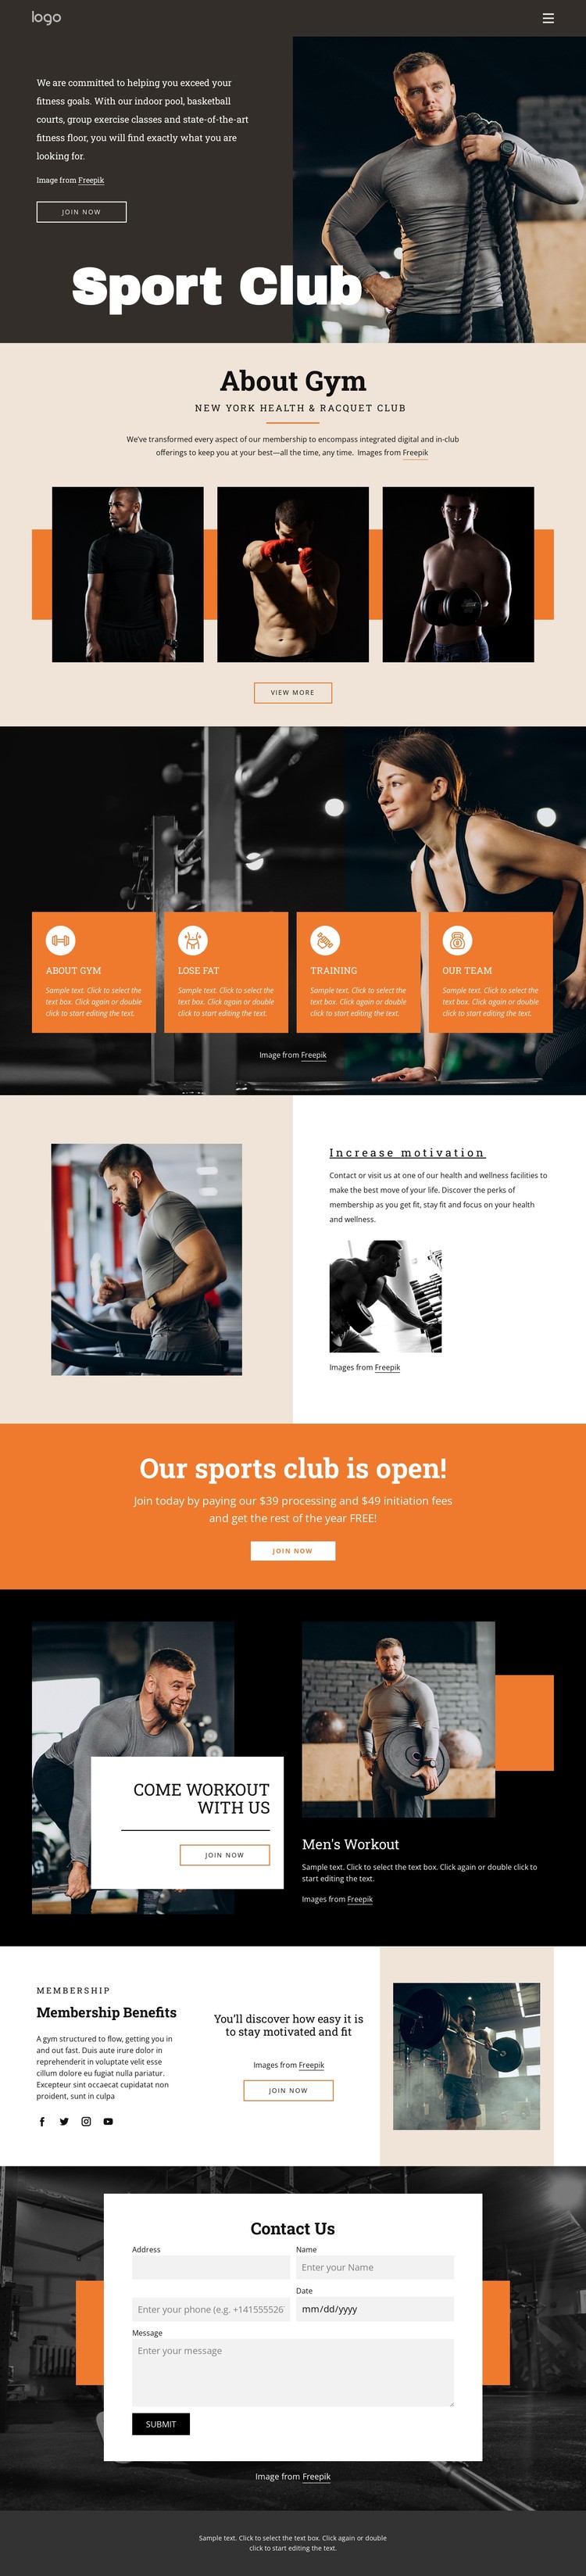 Convenient personal training programs CSS Template